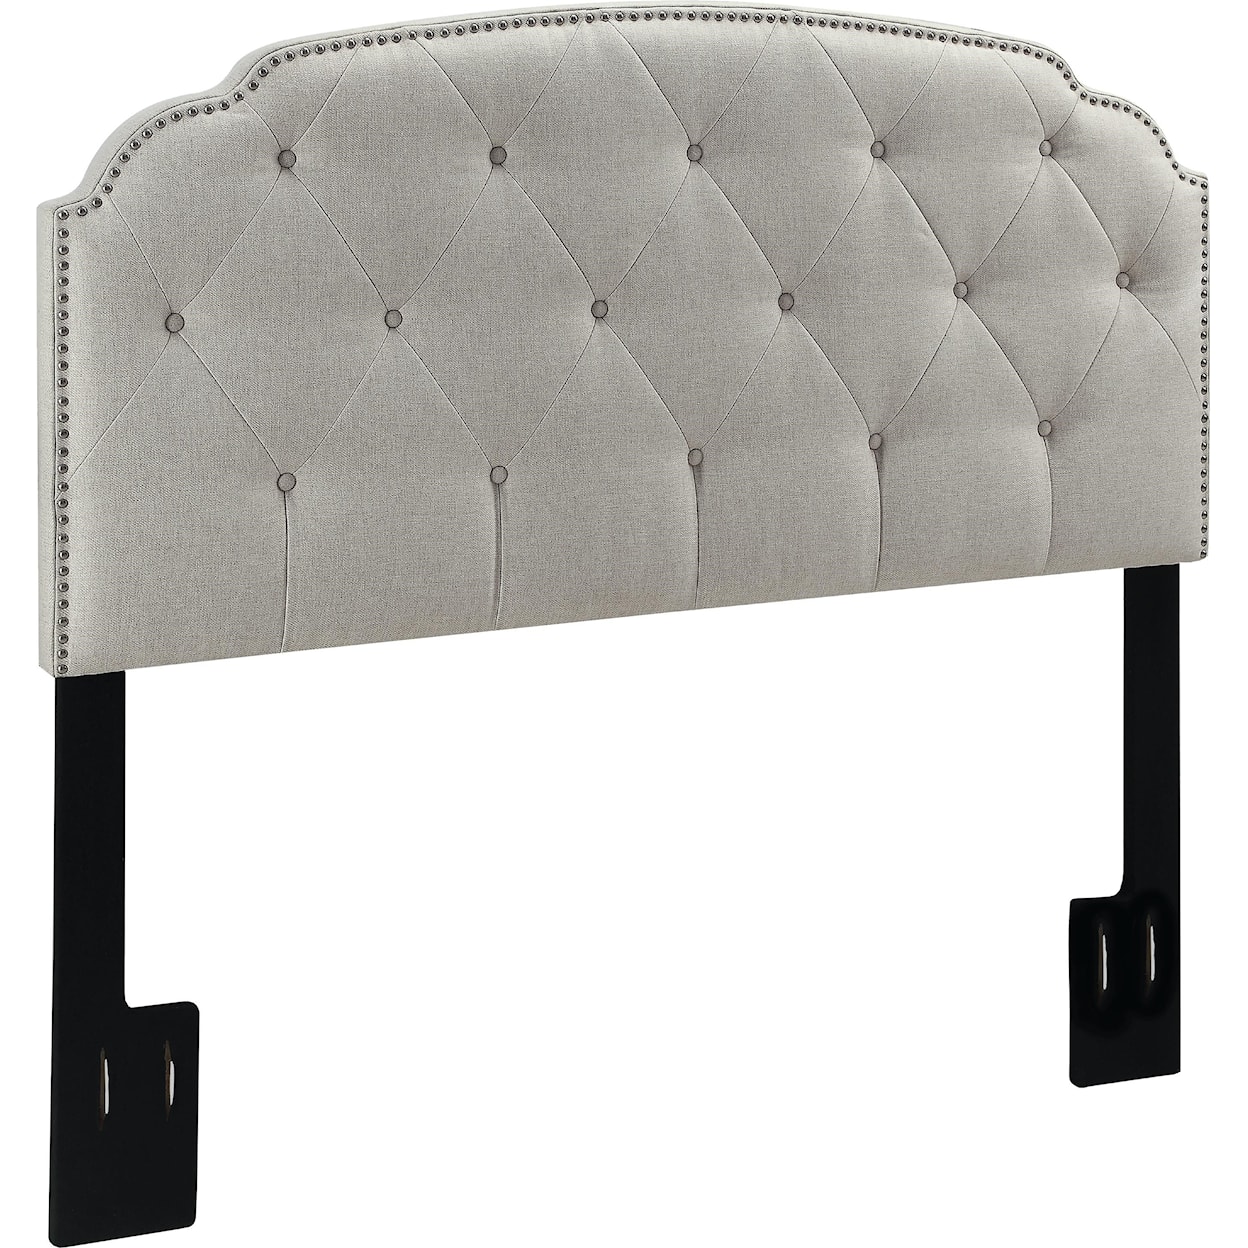 The Monday Company Upholstered Bedroom Upholstered Full/ Queen Headboard